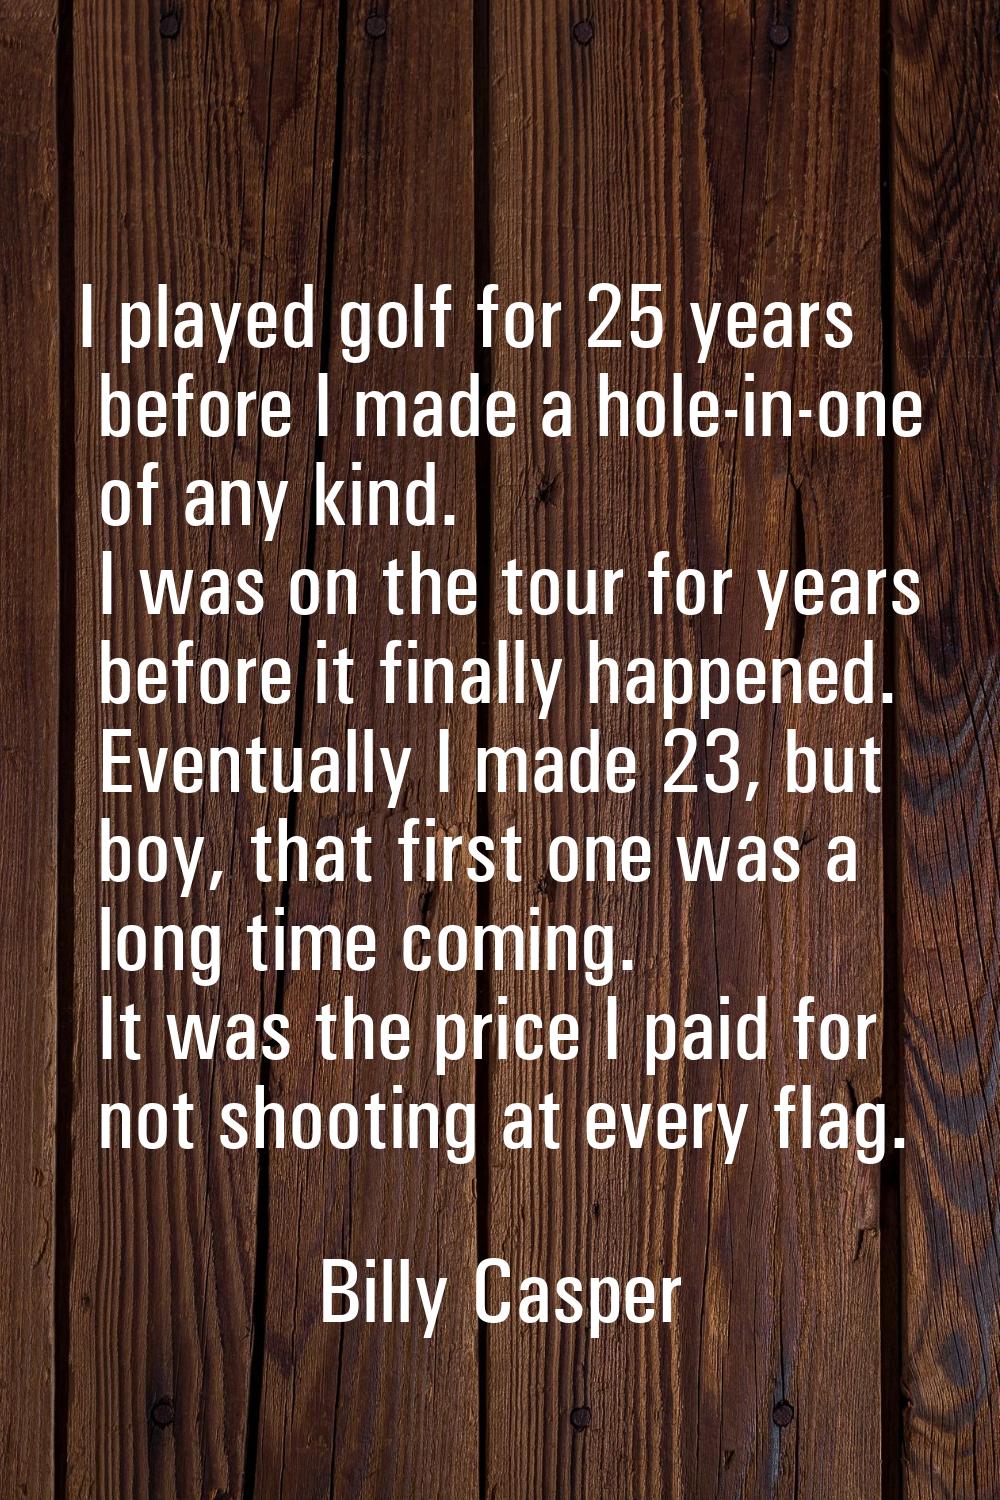 I played golf for 25 years before I made a hole-in-one of any kind. I was on the tour for years bef